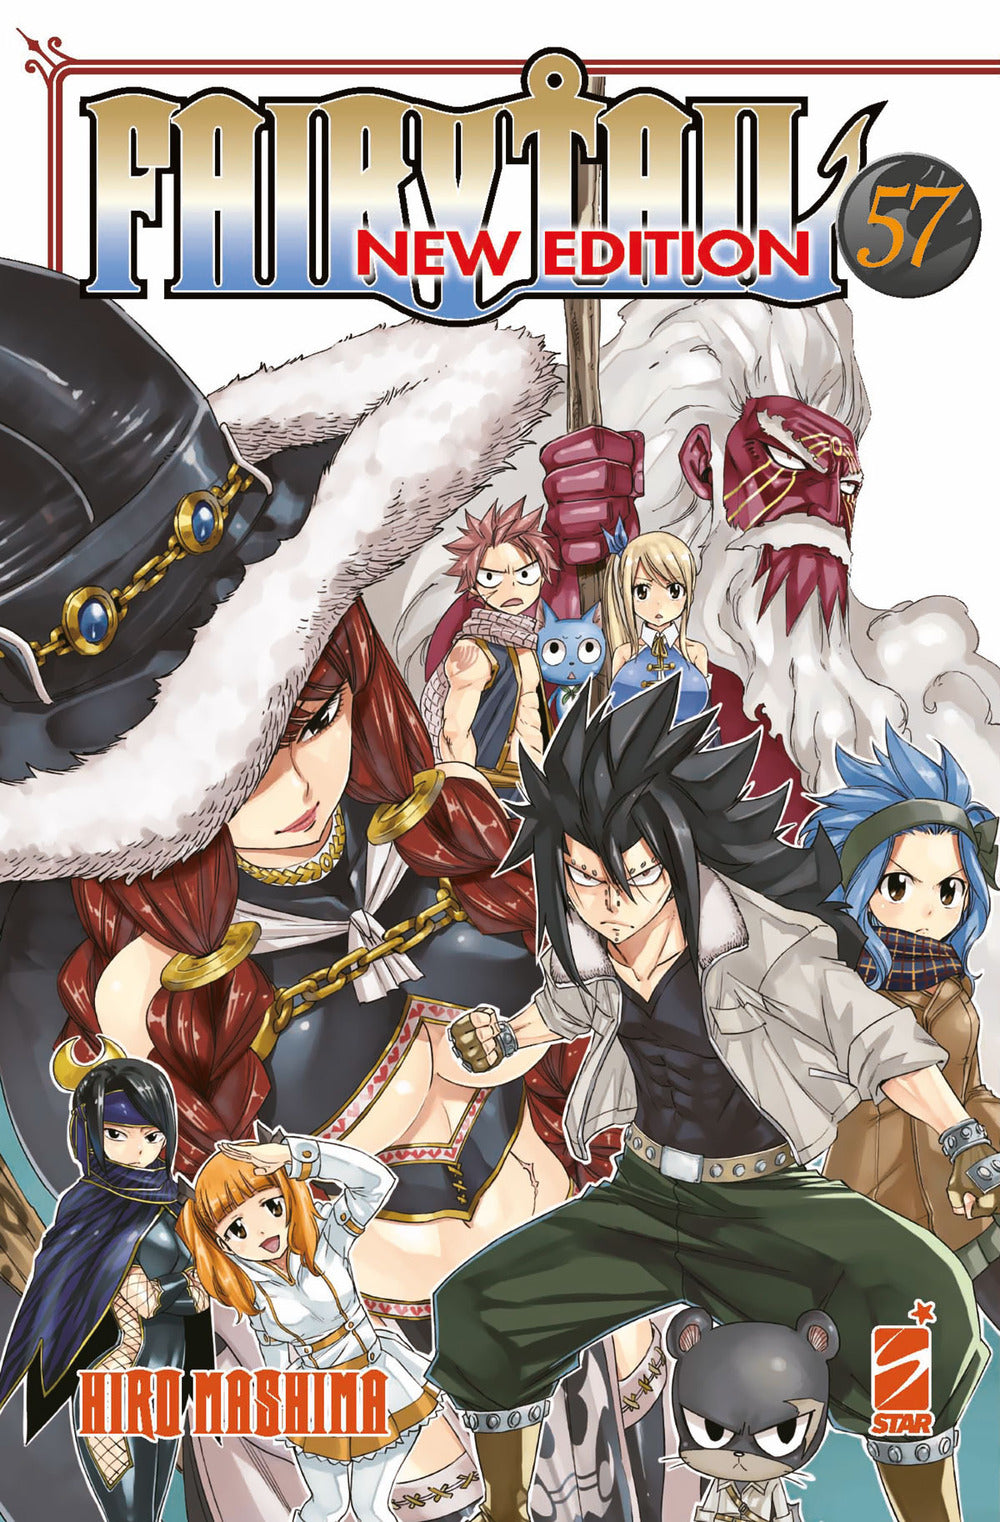 Fairy Tail. New edition. Vol. 57.